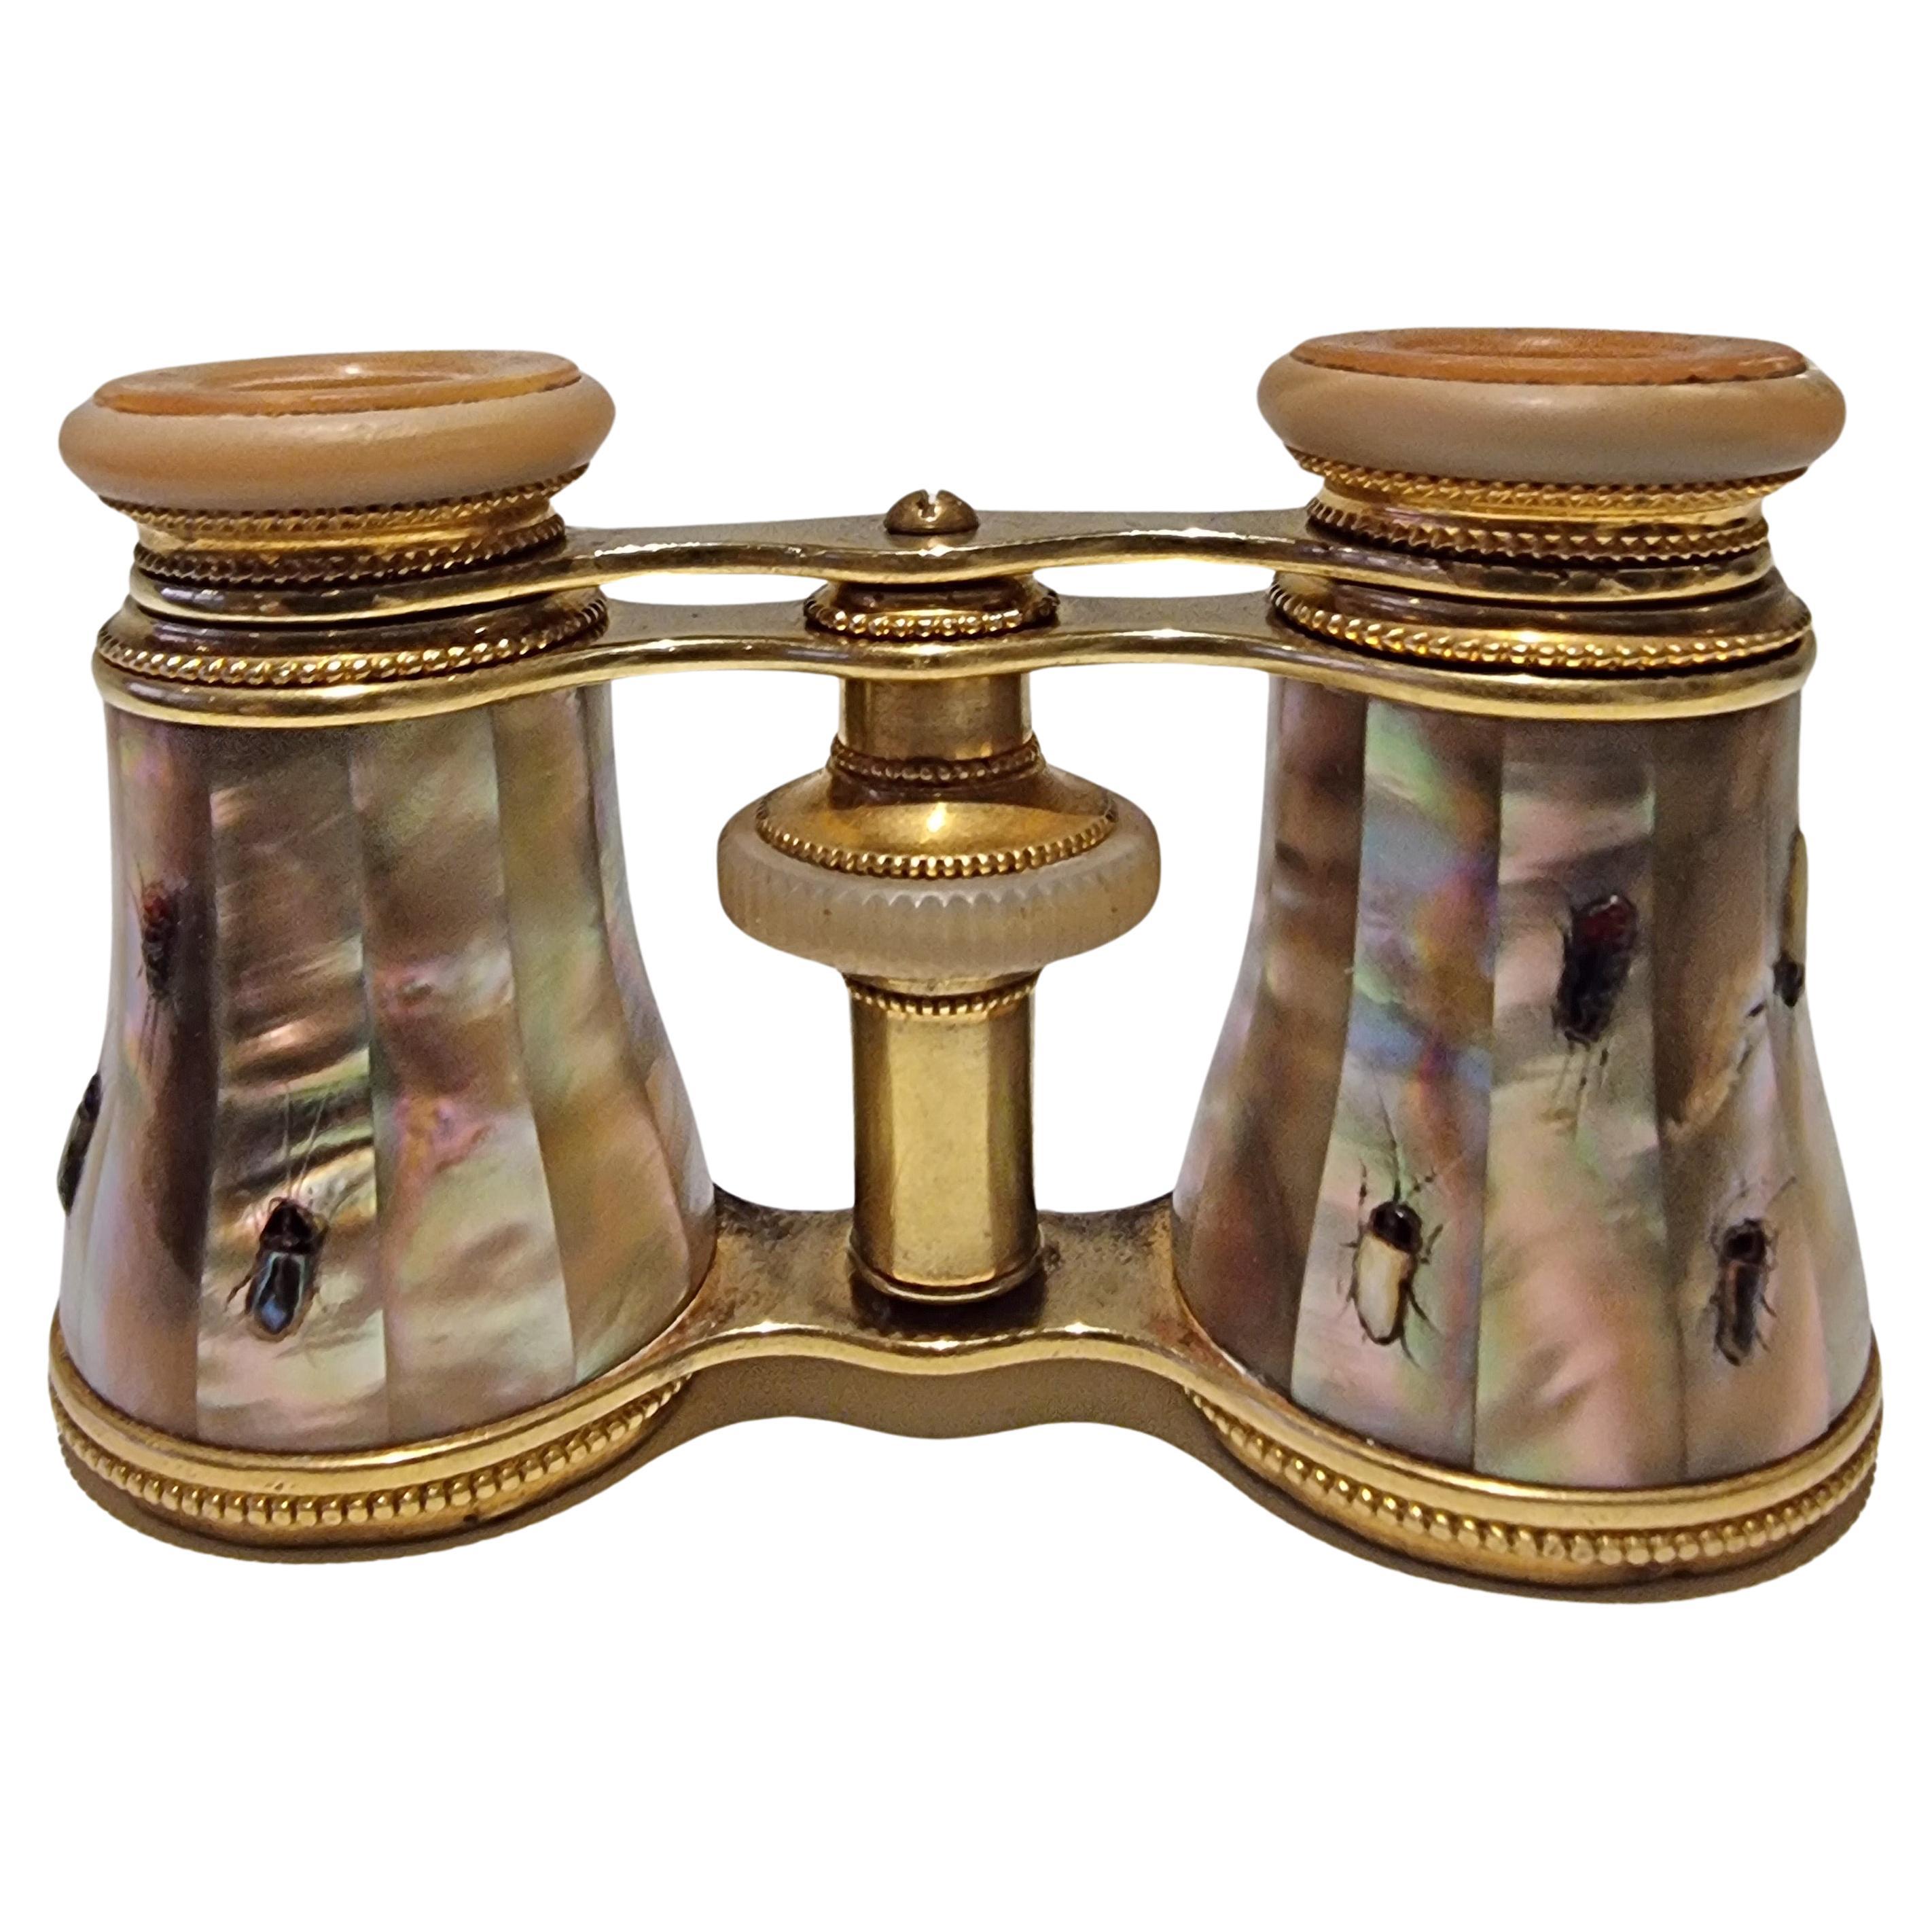 Shibayama Mother of Pearl Opera Glasses by Lemaire